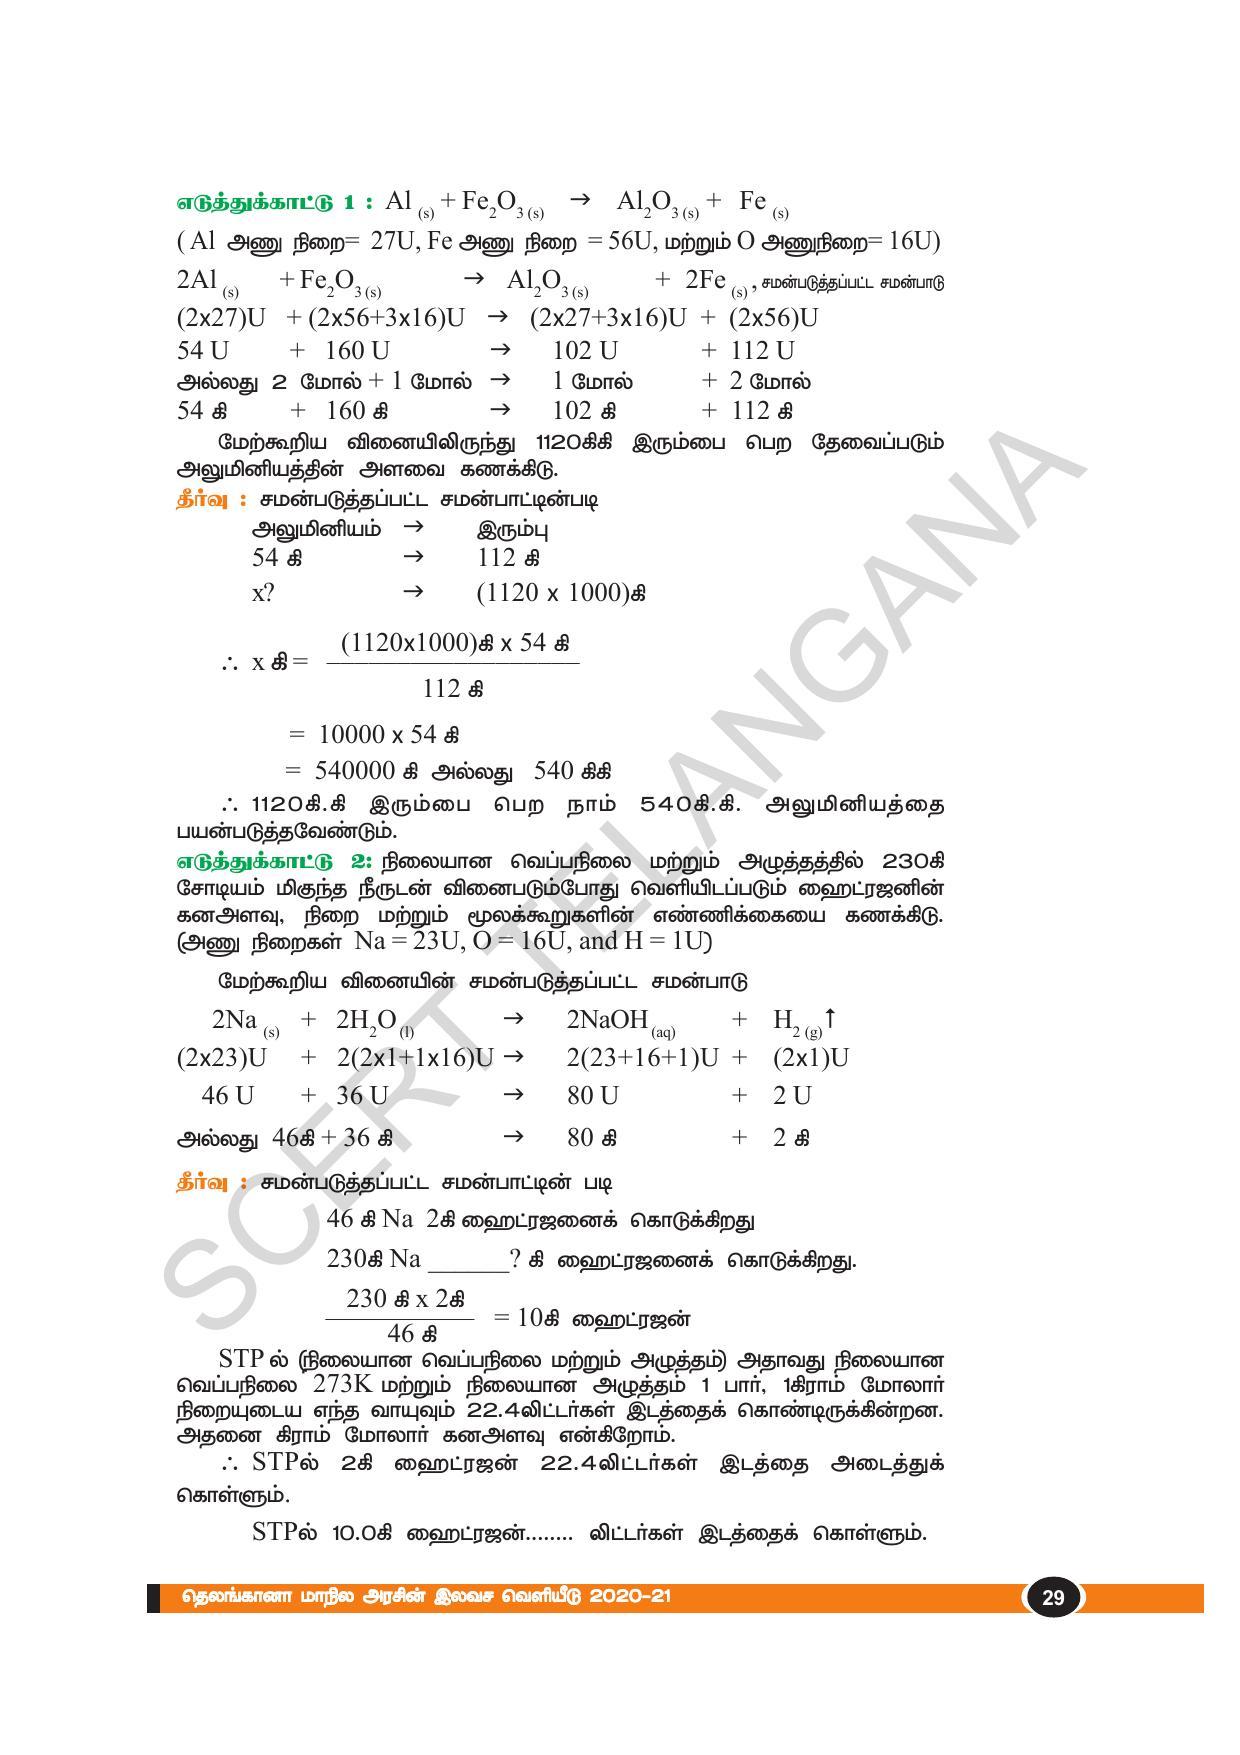 TS SCERT Class 10 Physical Science(Tamil Medium) Text Book - Page 41